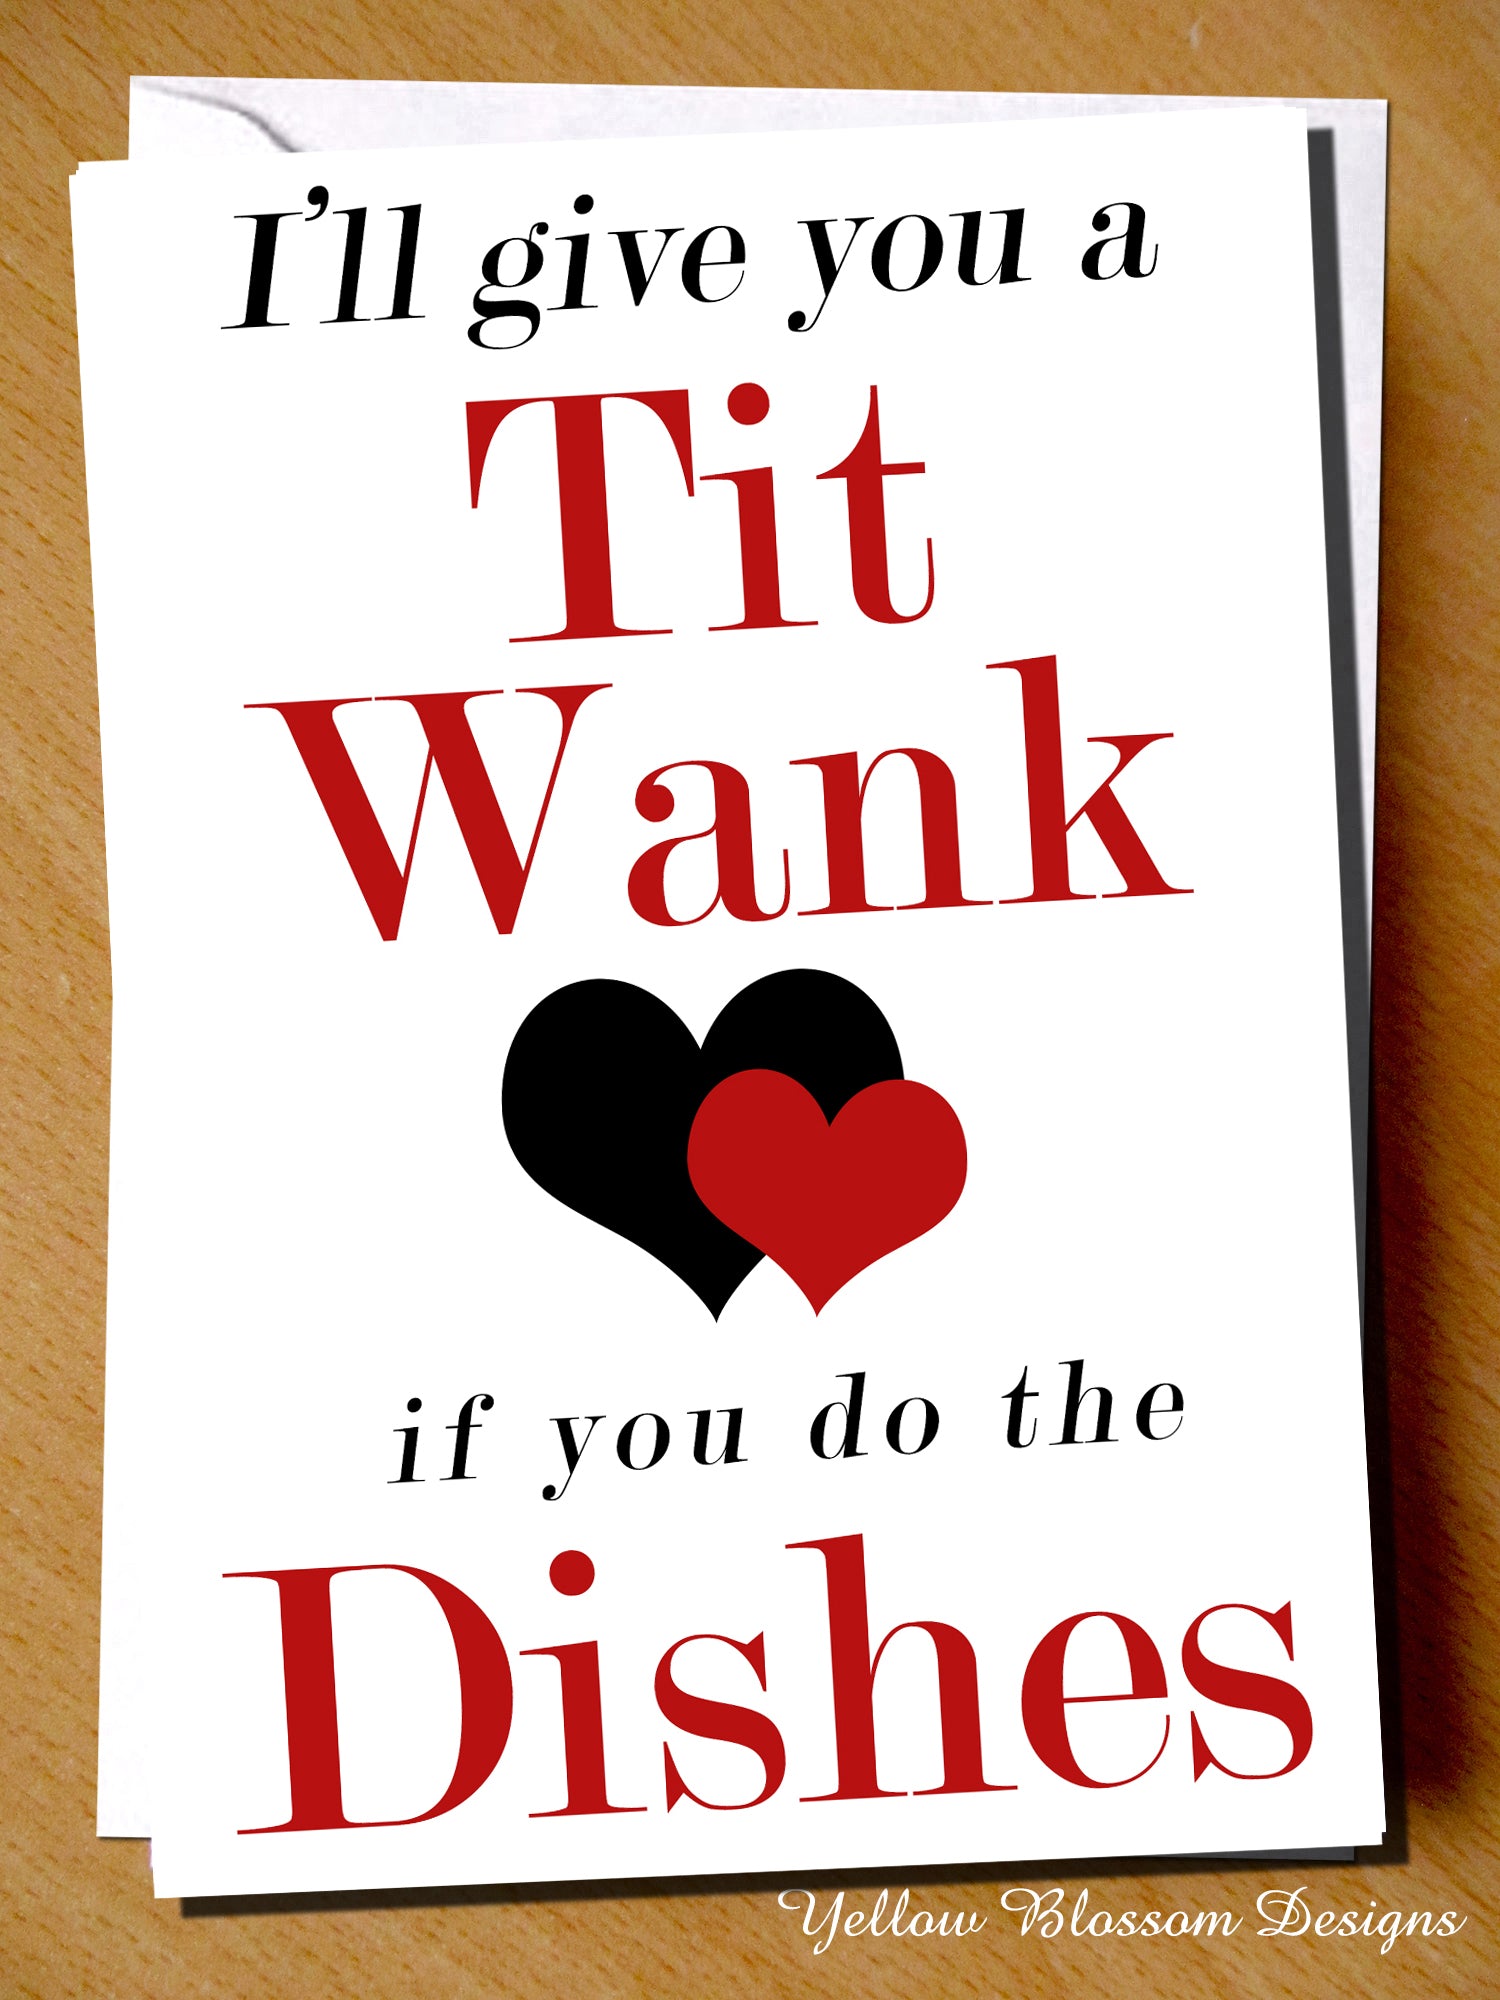 How To Give A Titwank